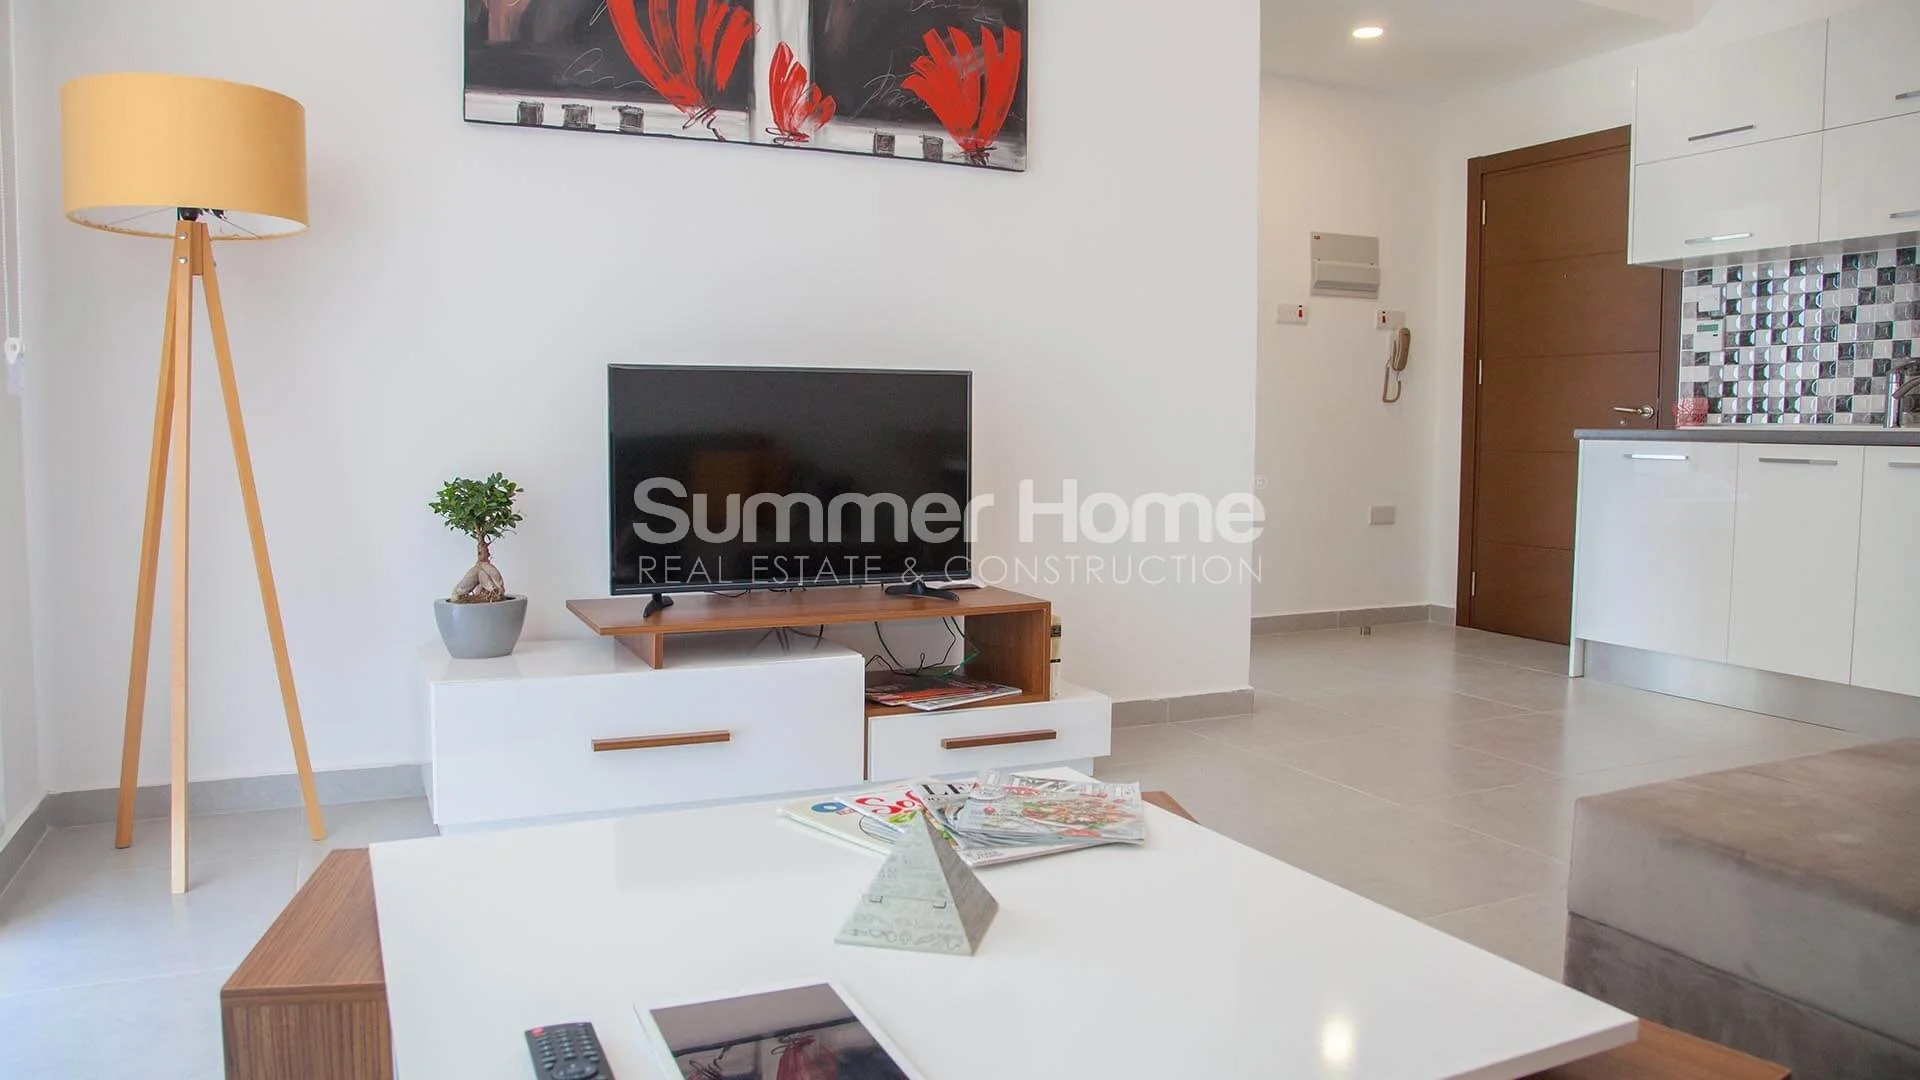 Unique apartments located in Famagusta Northern Cyprus Interior - 3